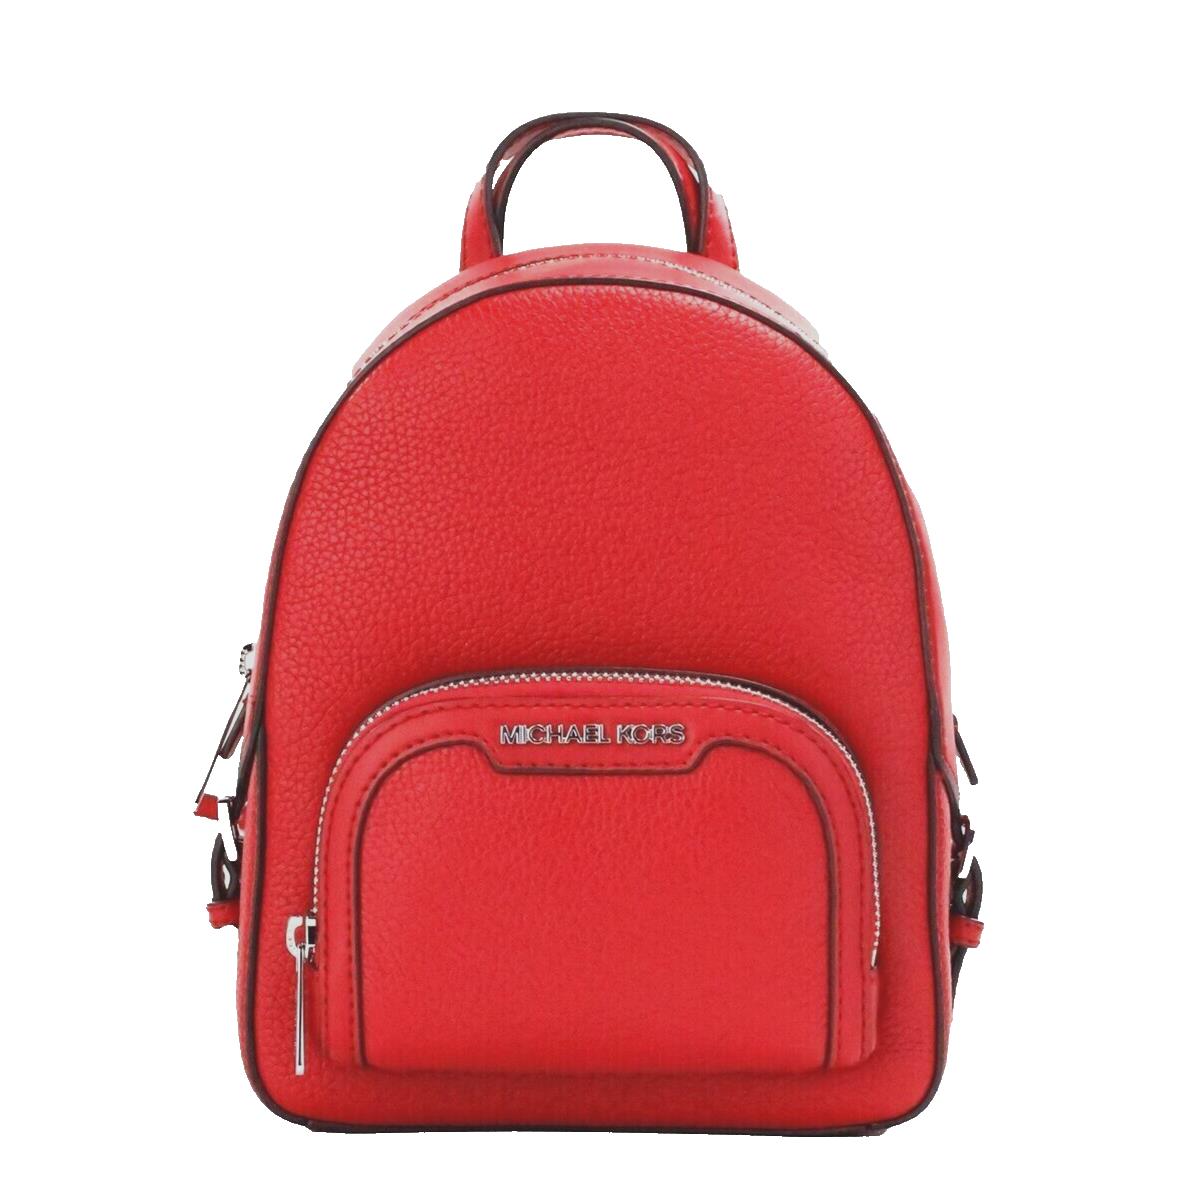 Michael Kors Jaycee Extra-small Convertible Backpack Bright Red / Dust Bag